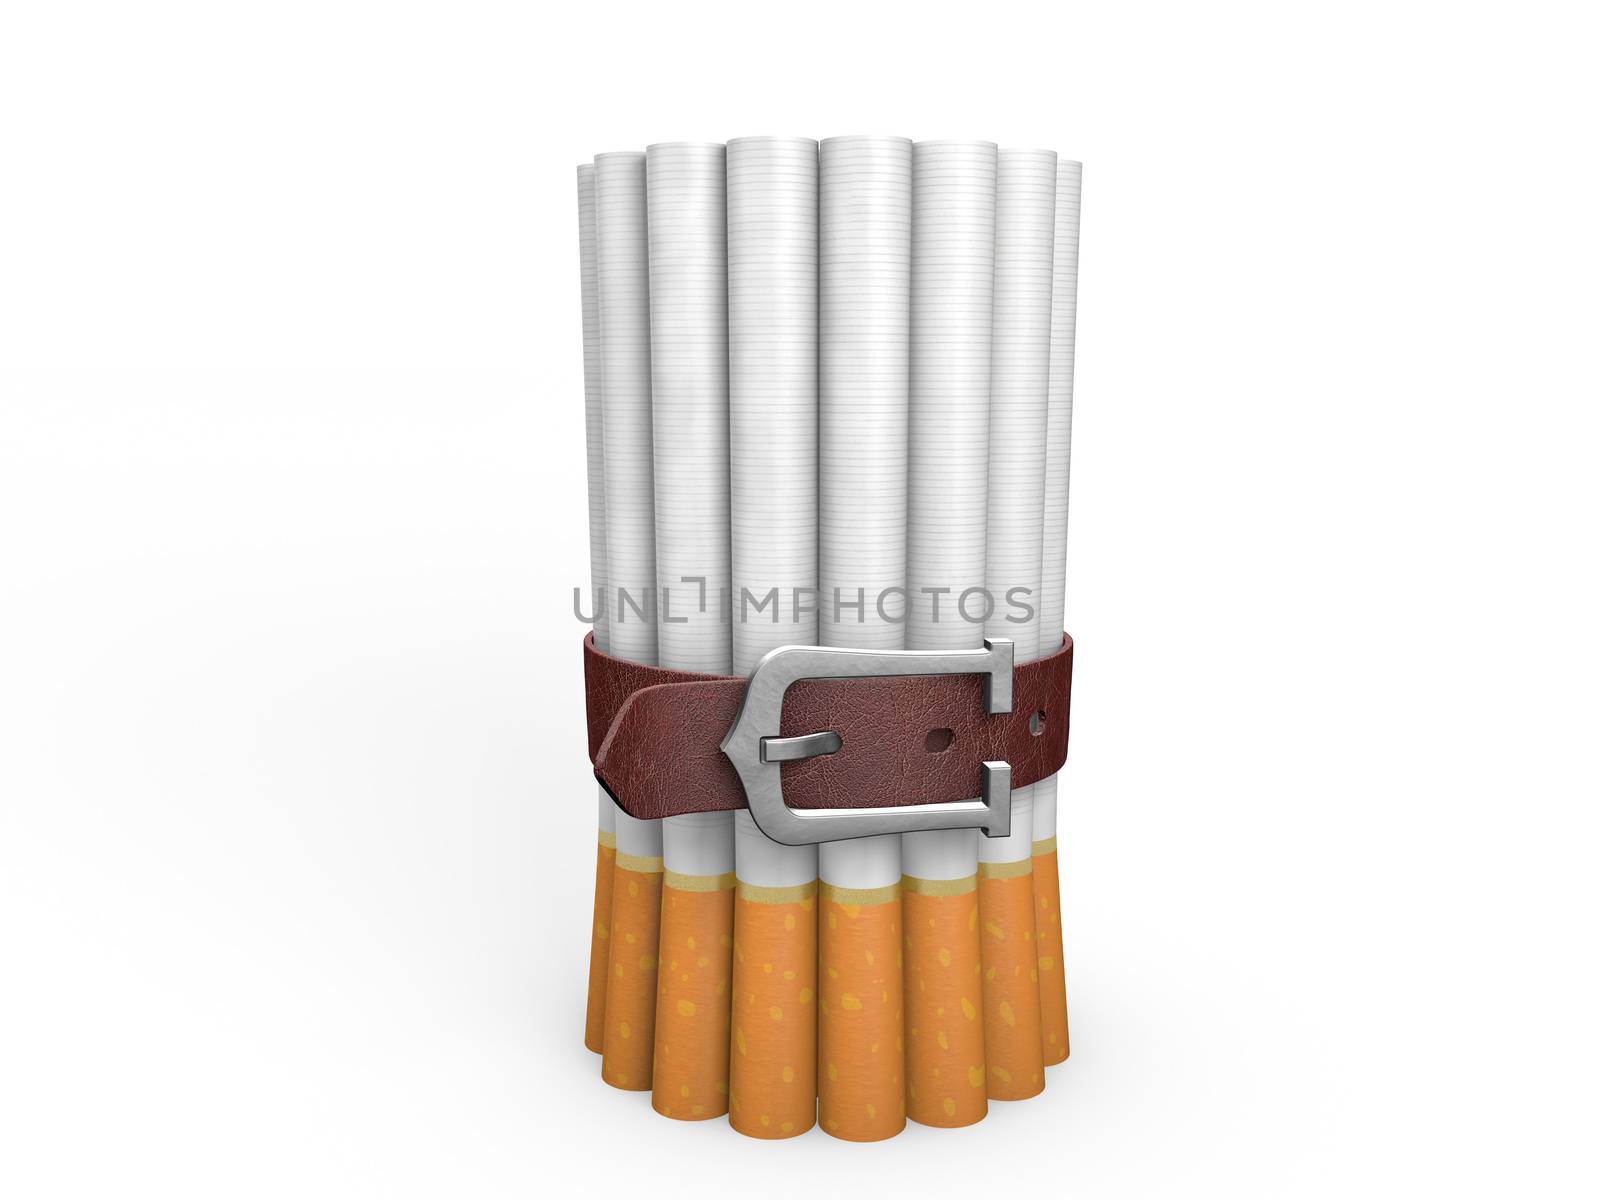 Belted stack of cigarettes isolated on white background. Anti-smoking concept.